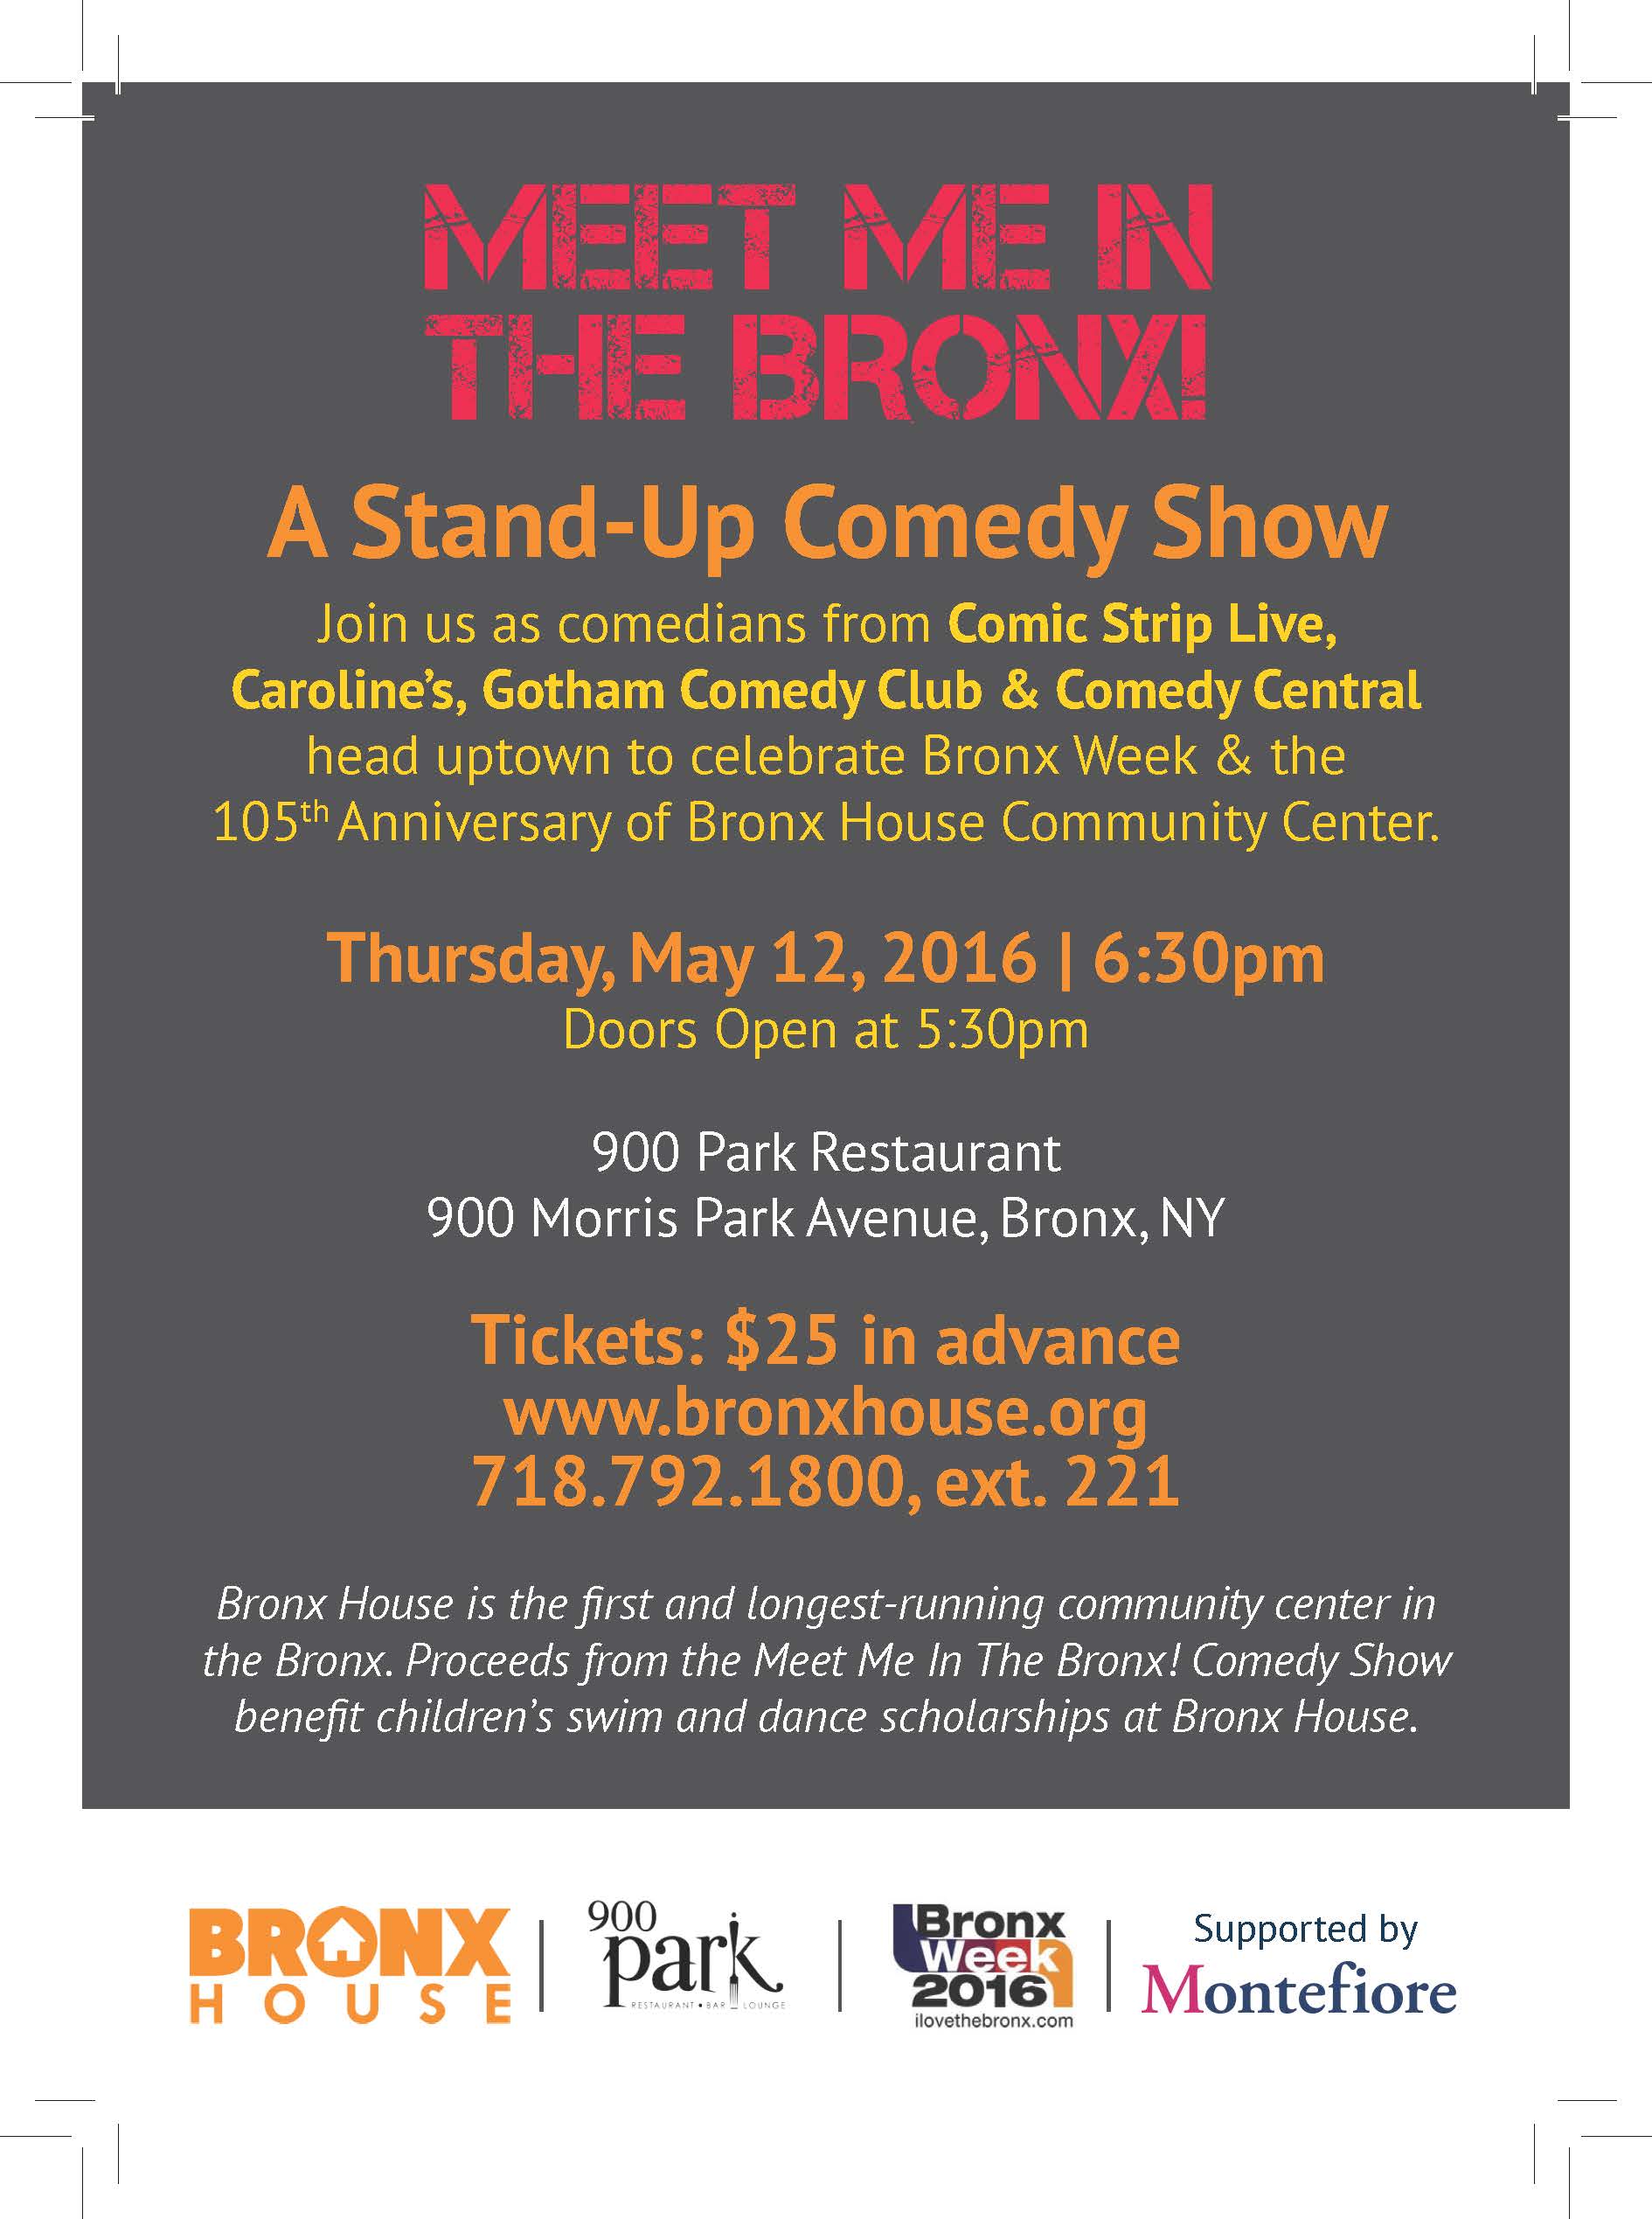 Meet Me In the Bronx! Comedy Show benefitting Bronx House_Page_2